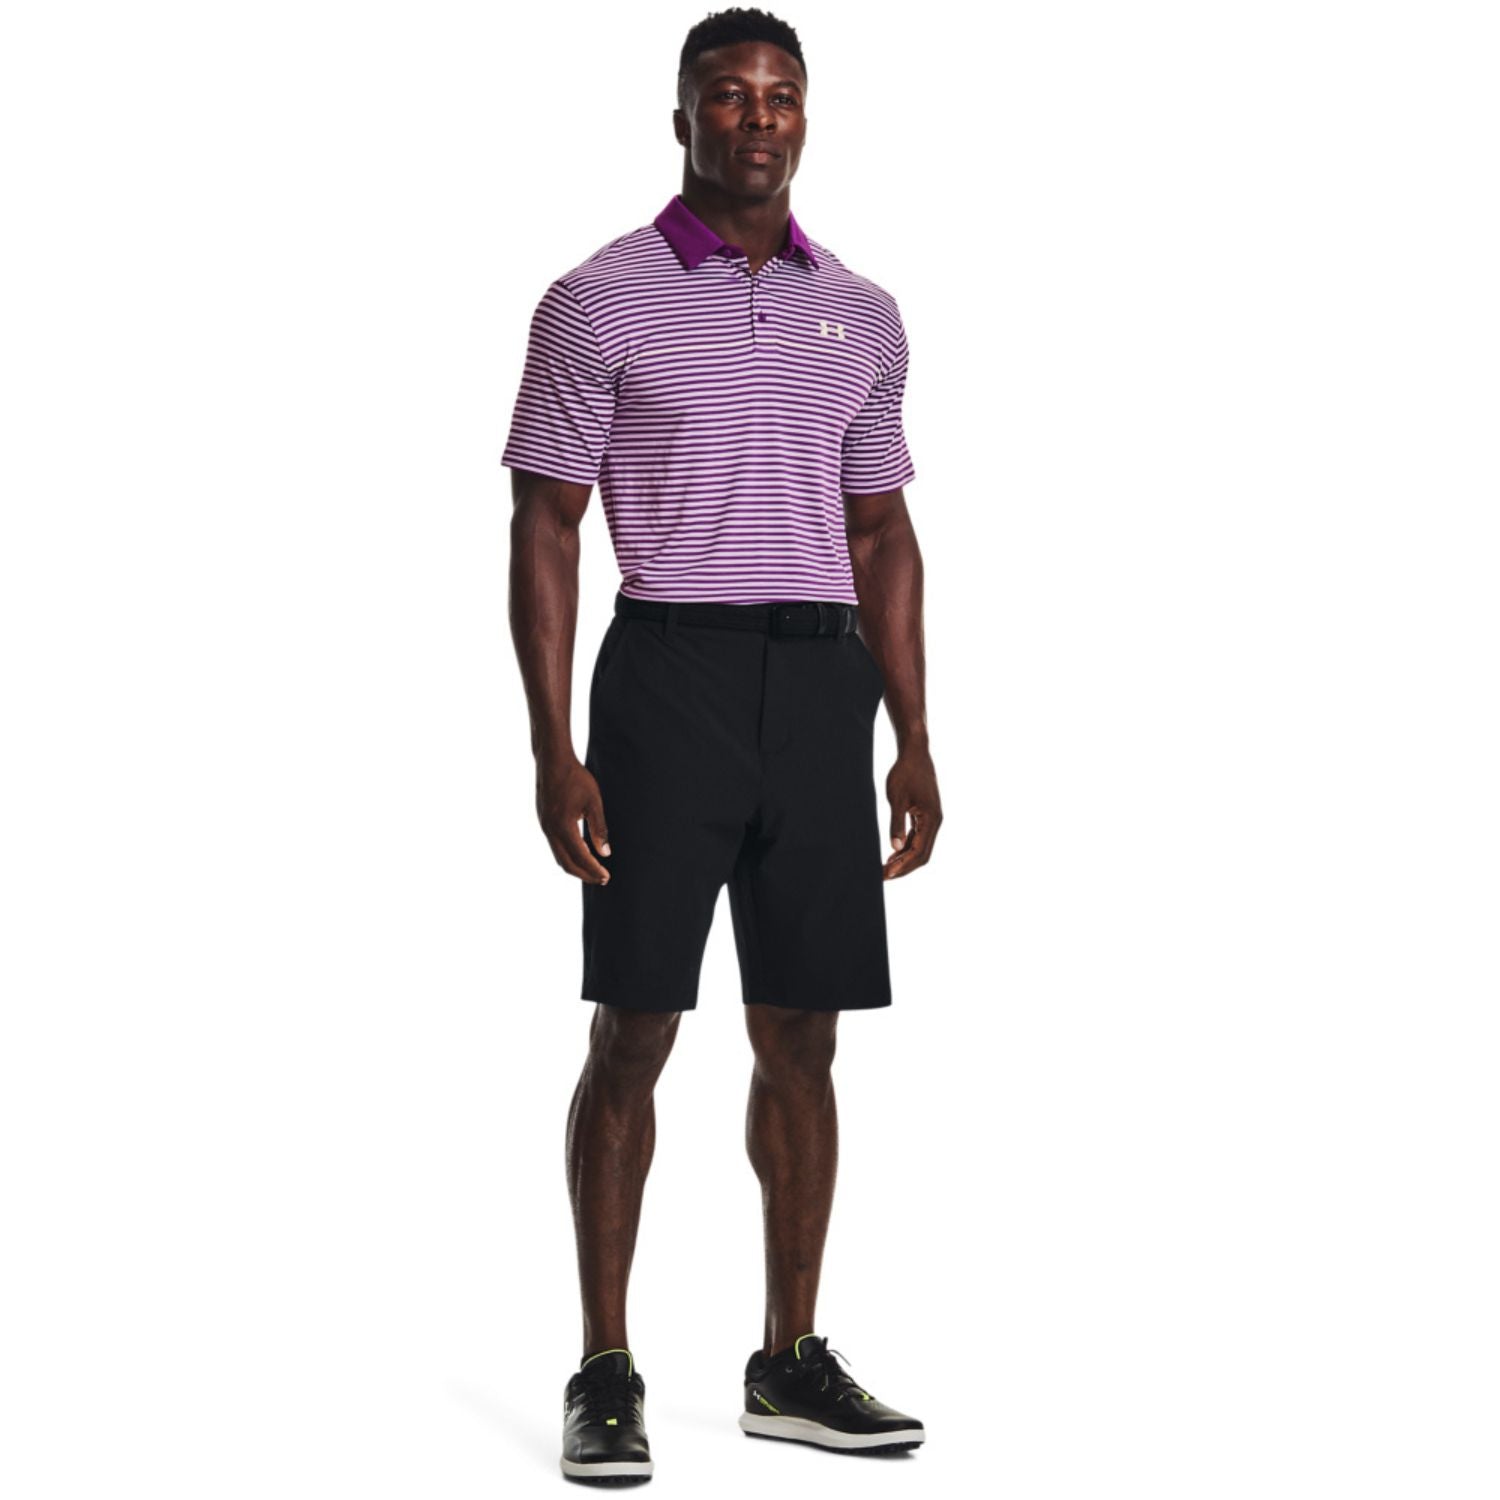 Under Armour Drive Taper Golf Shorts